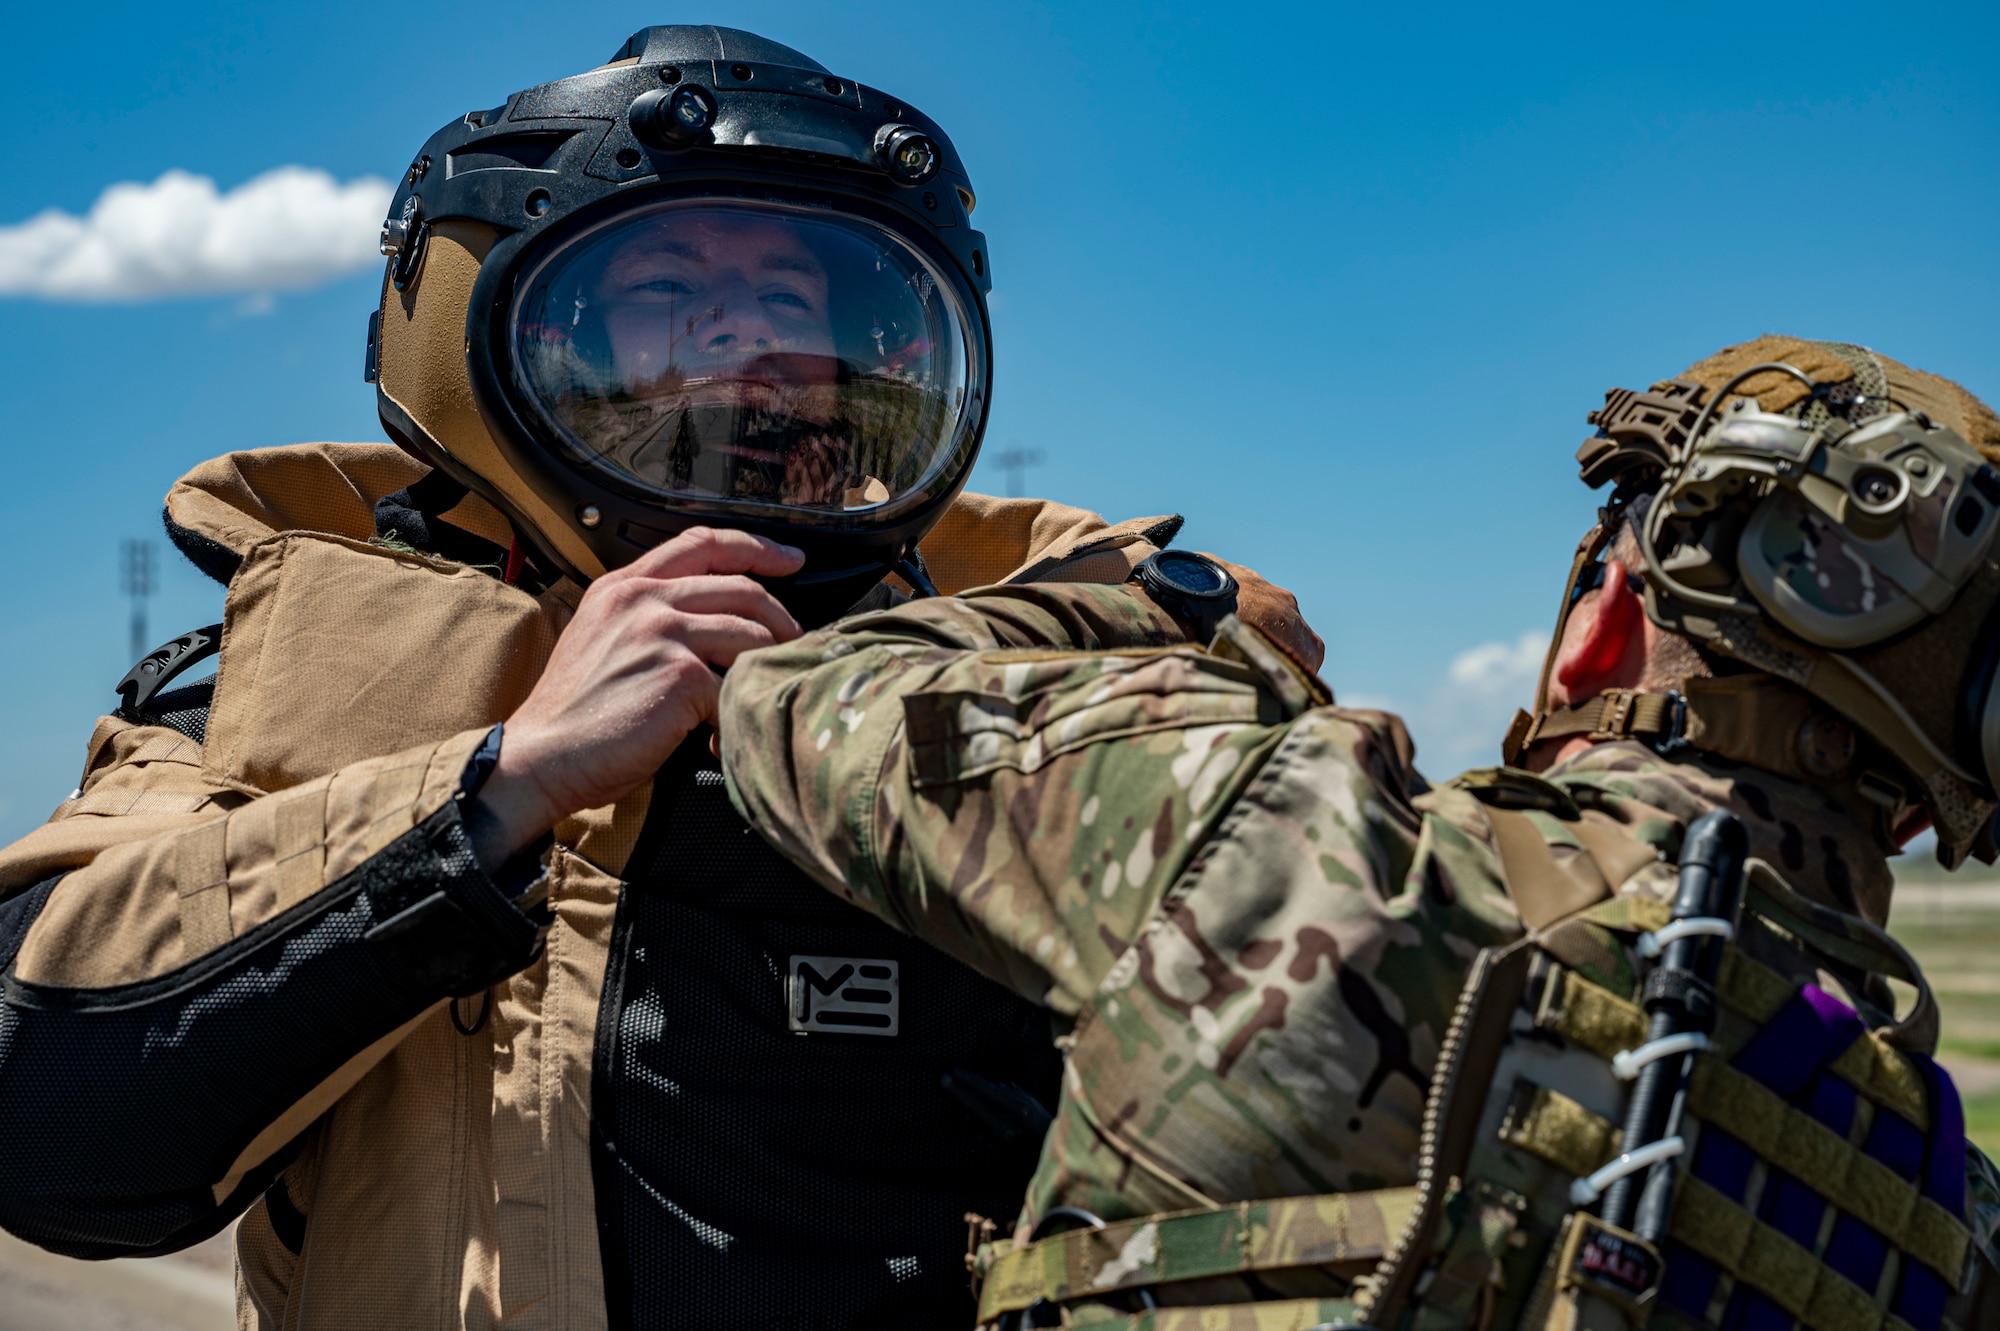 Airman putting on bomb suit